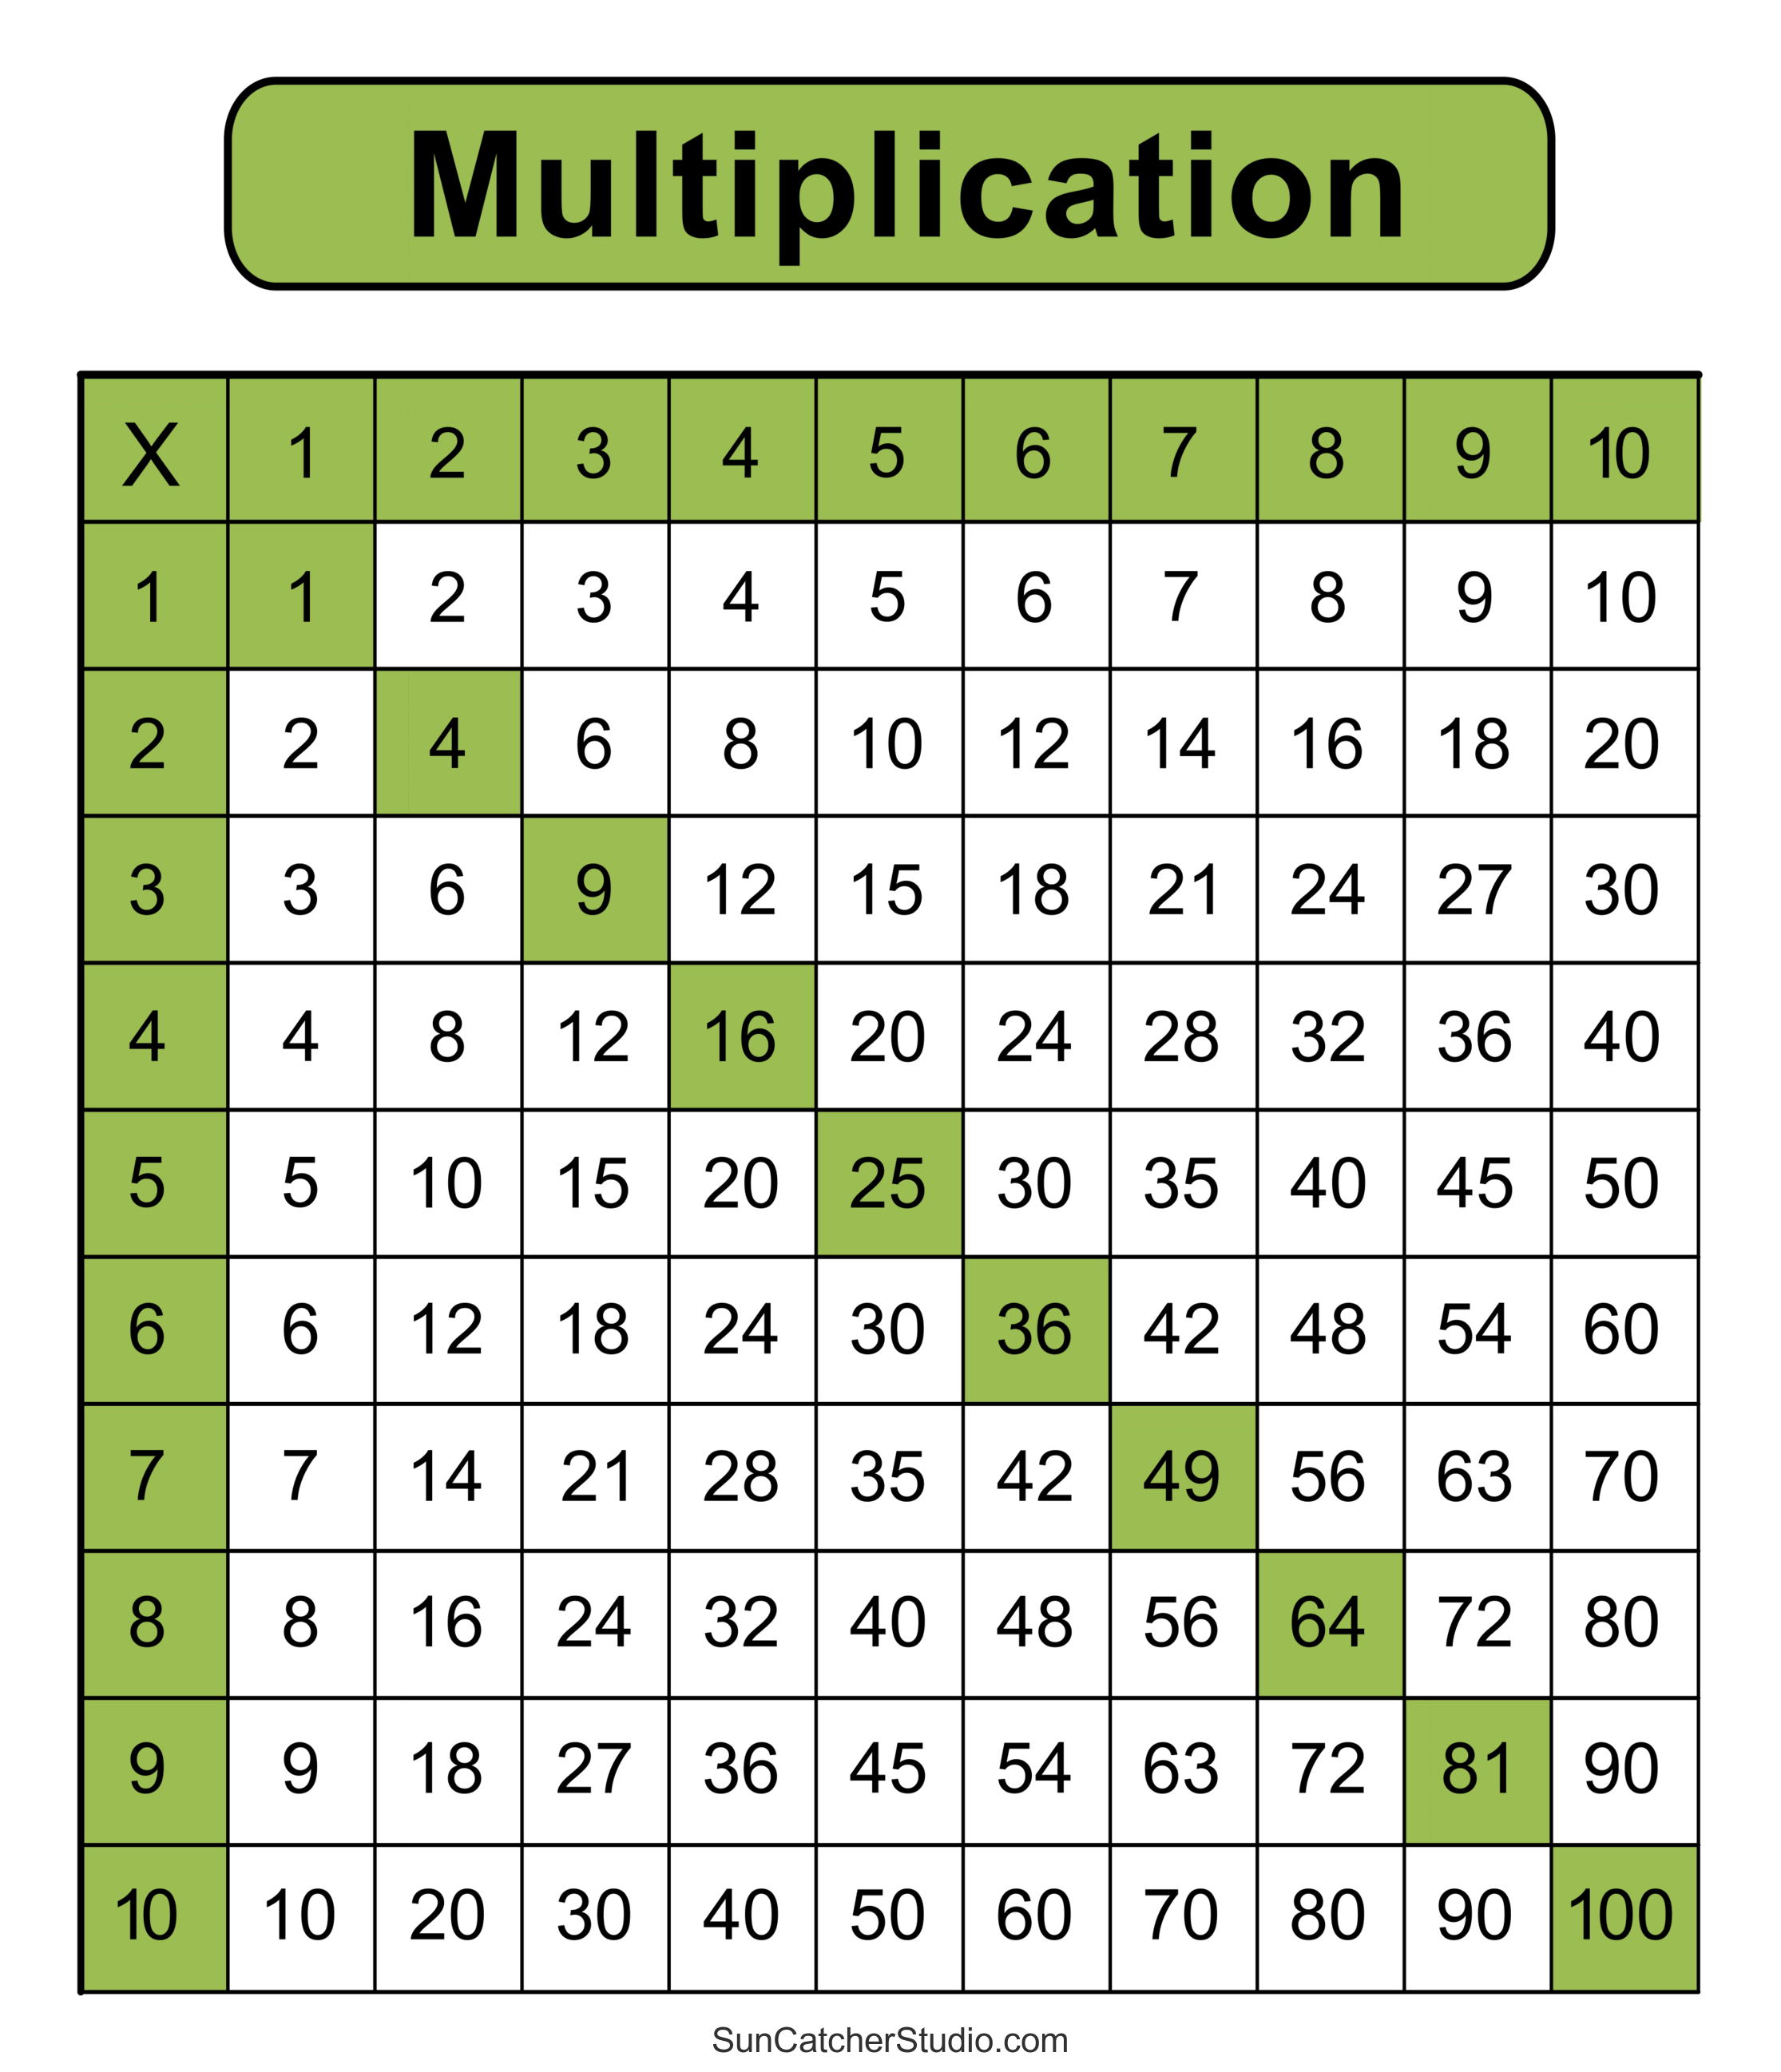 multiplication-charts-pdf-free-printable-times-tables-diy-projects-patterns-monograms